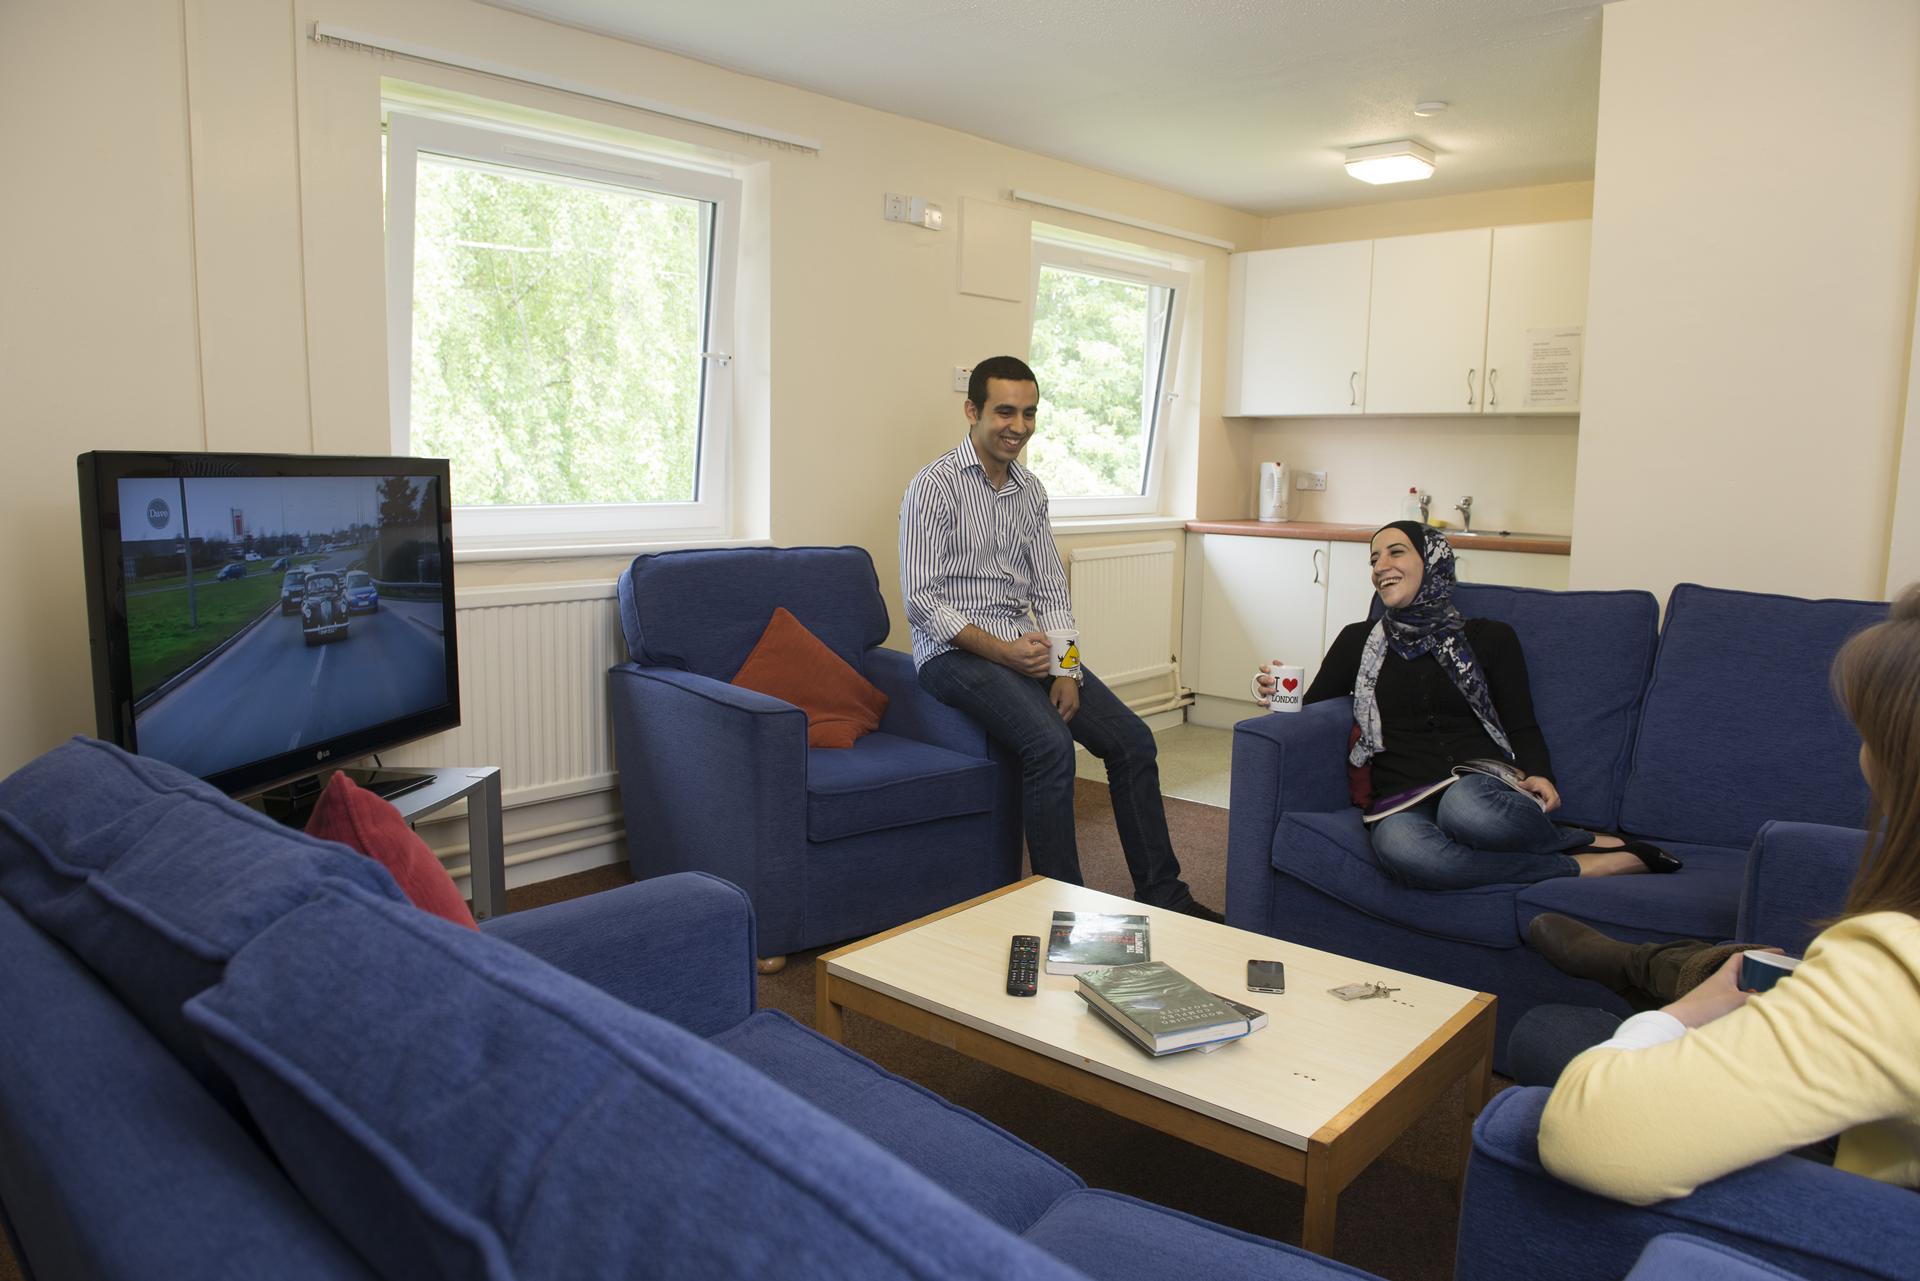 Postgraduates And Private Halls Of Residence For Students